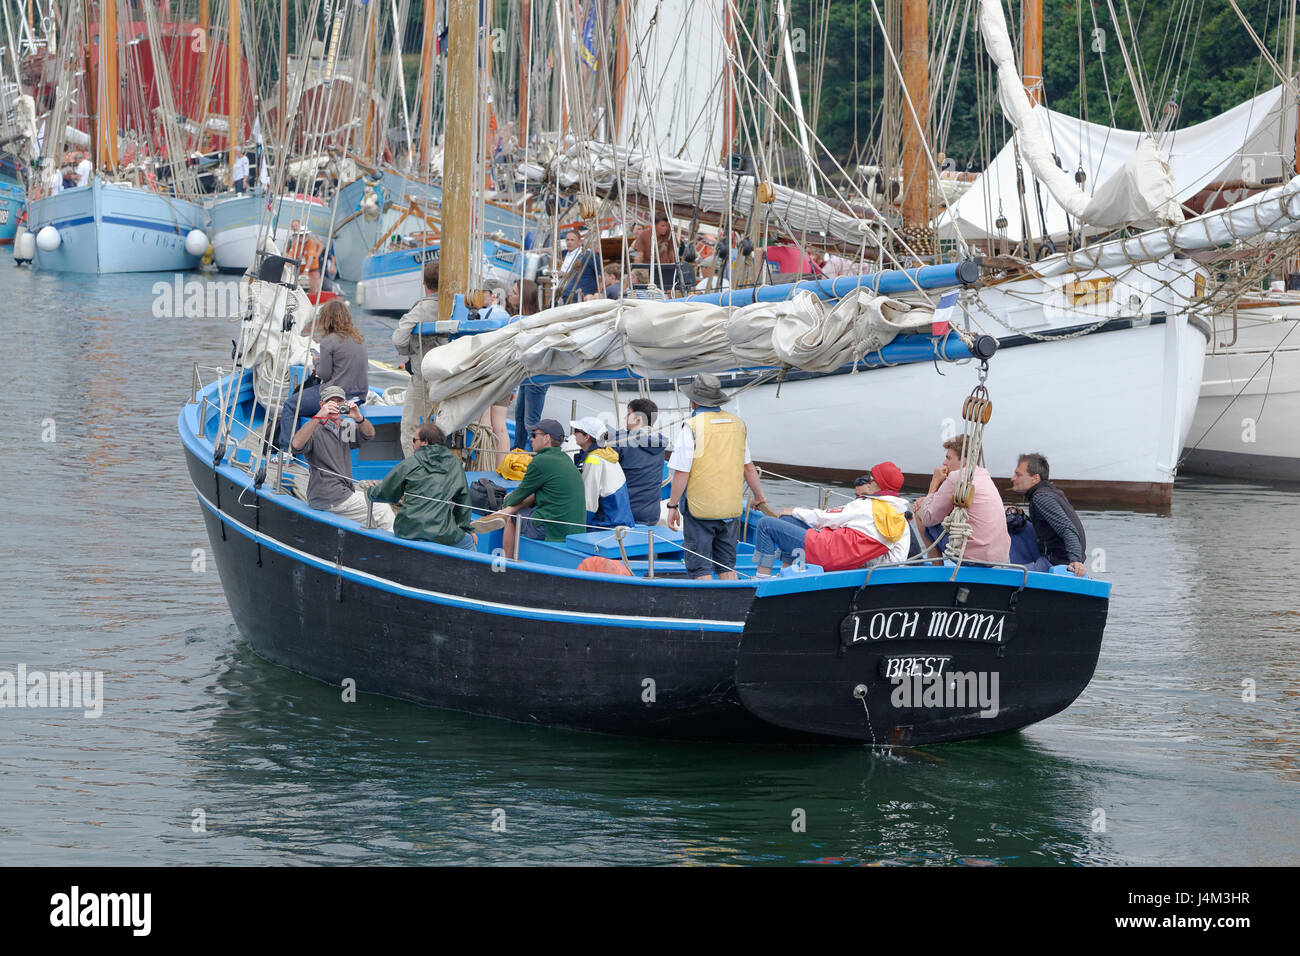 Loch Monna : traditional fishing boat (dredging of the scallop), built in 1956, homeport : Brest, Brittany, Fr. Stock Photo